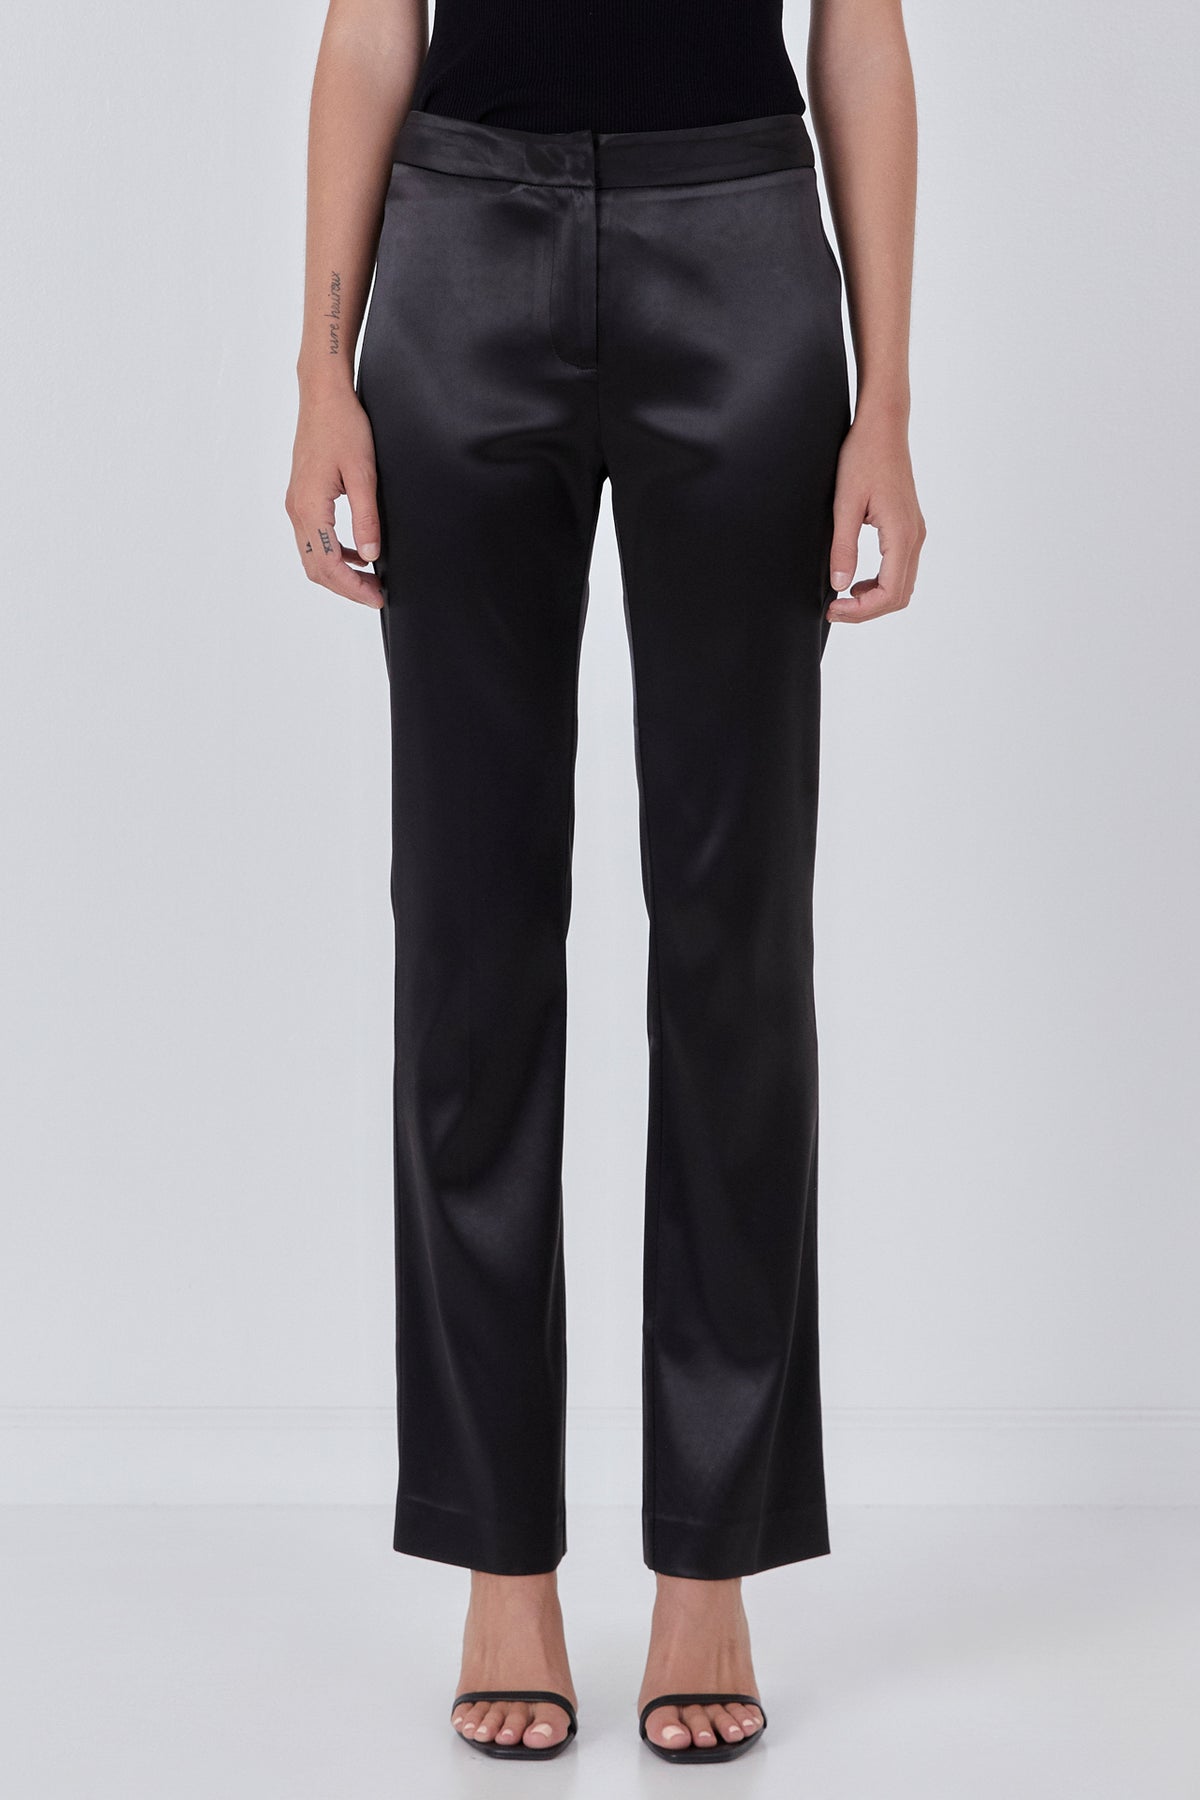 ENDLESS ROSE - Flared Solid Trouser - PANTS available at Objectrare